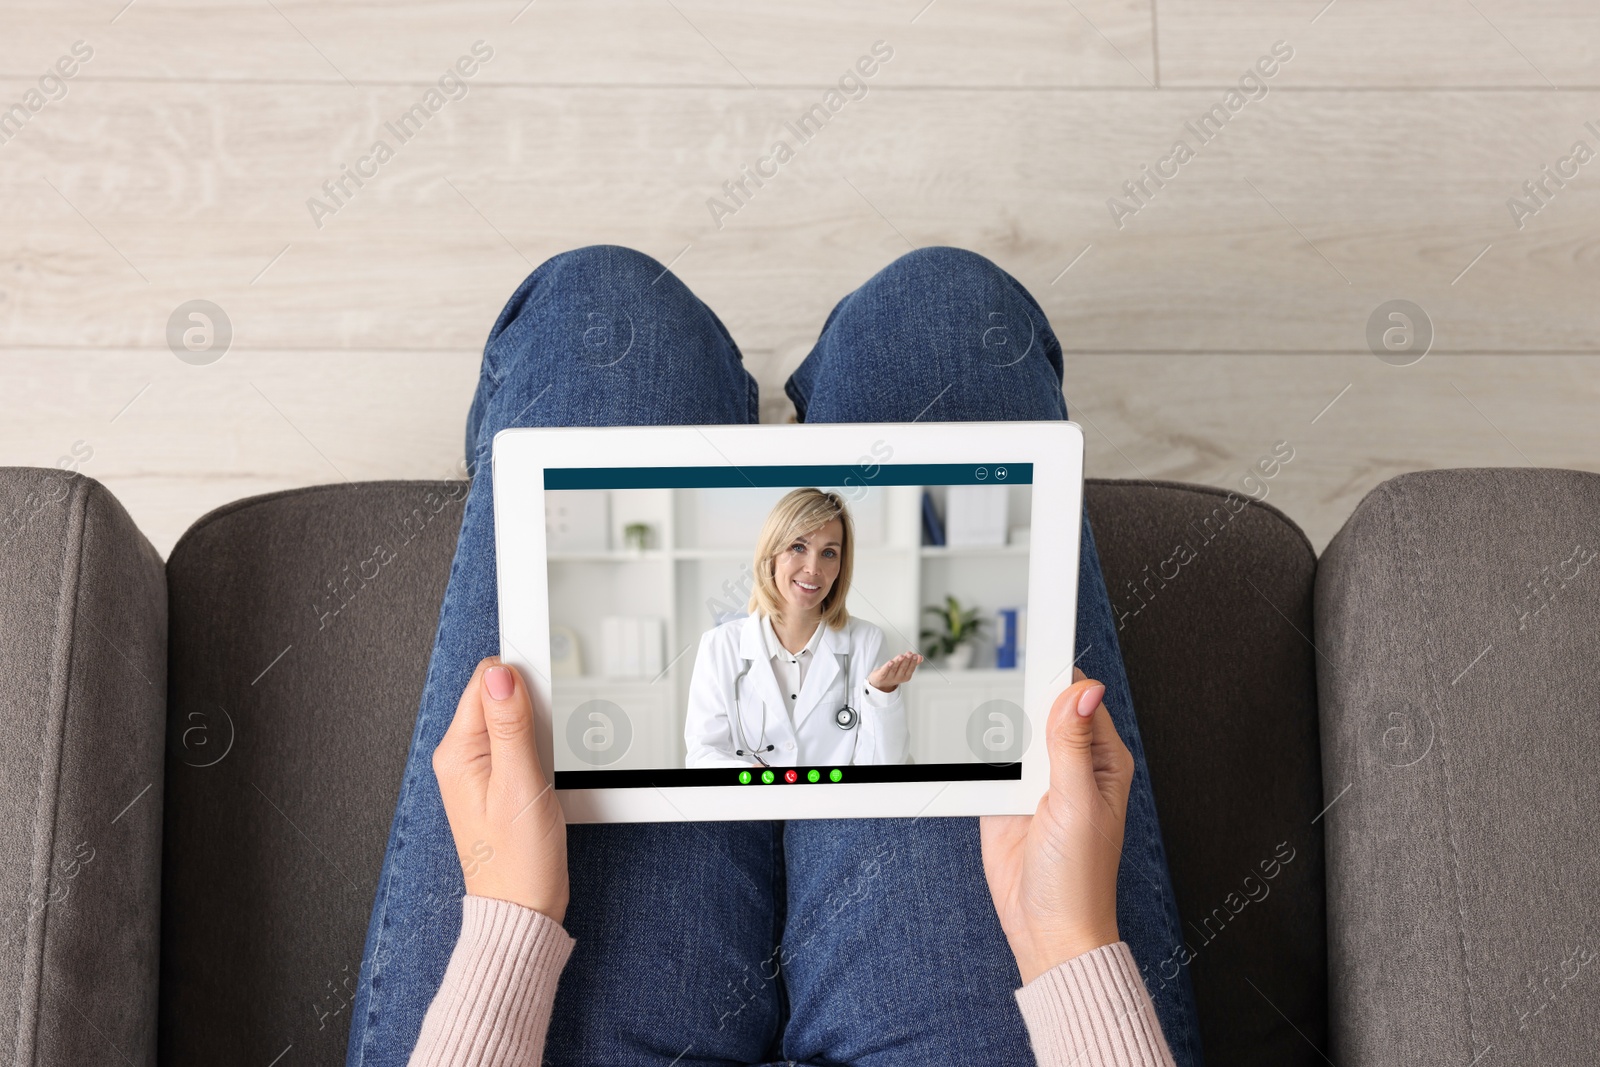 Image of Online medical consultation. Woman having video chat with doctor via tablet at home, top view